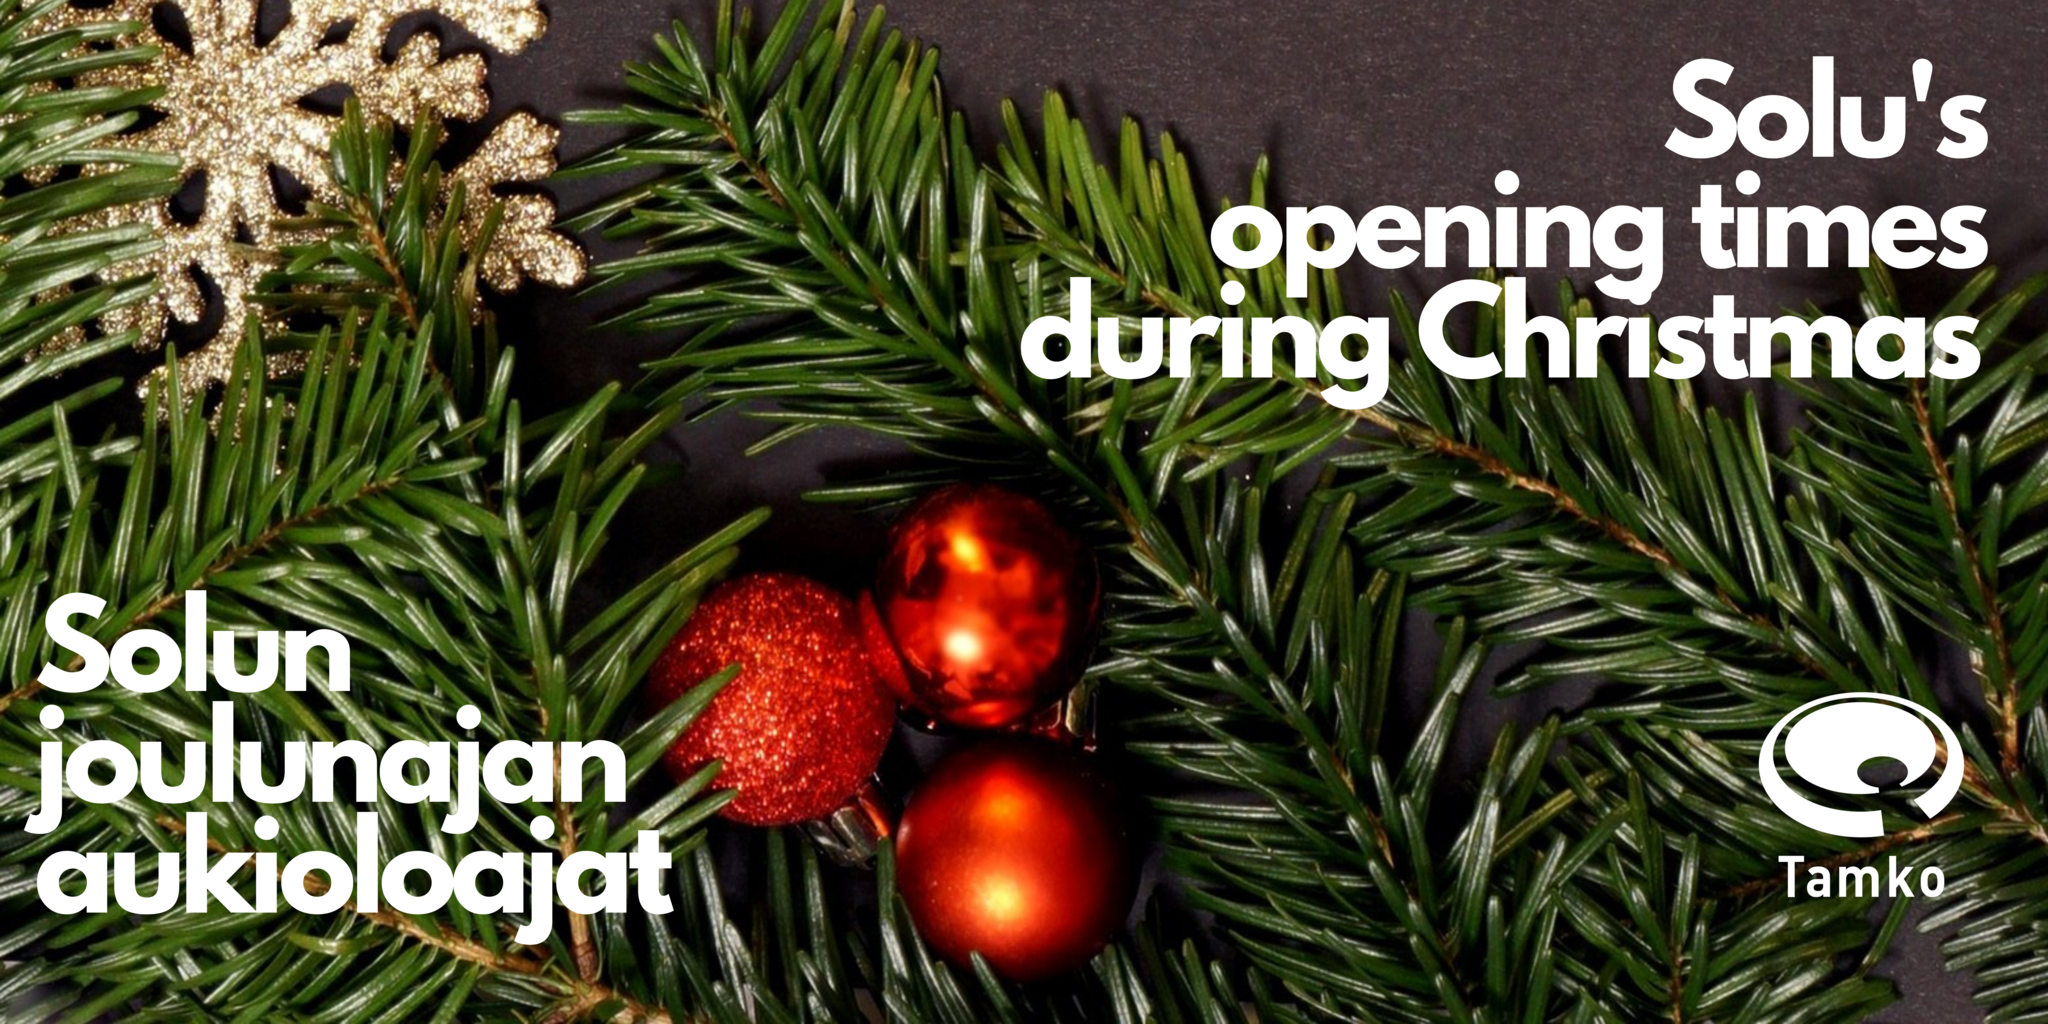 Solu’s opening times during Christmas